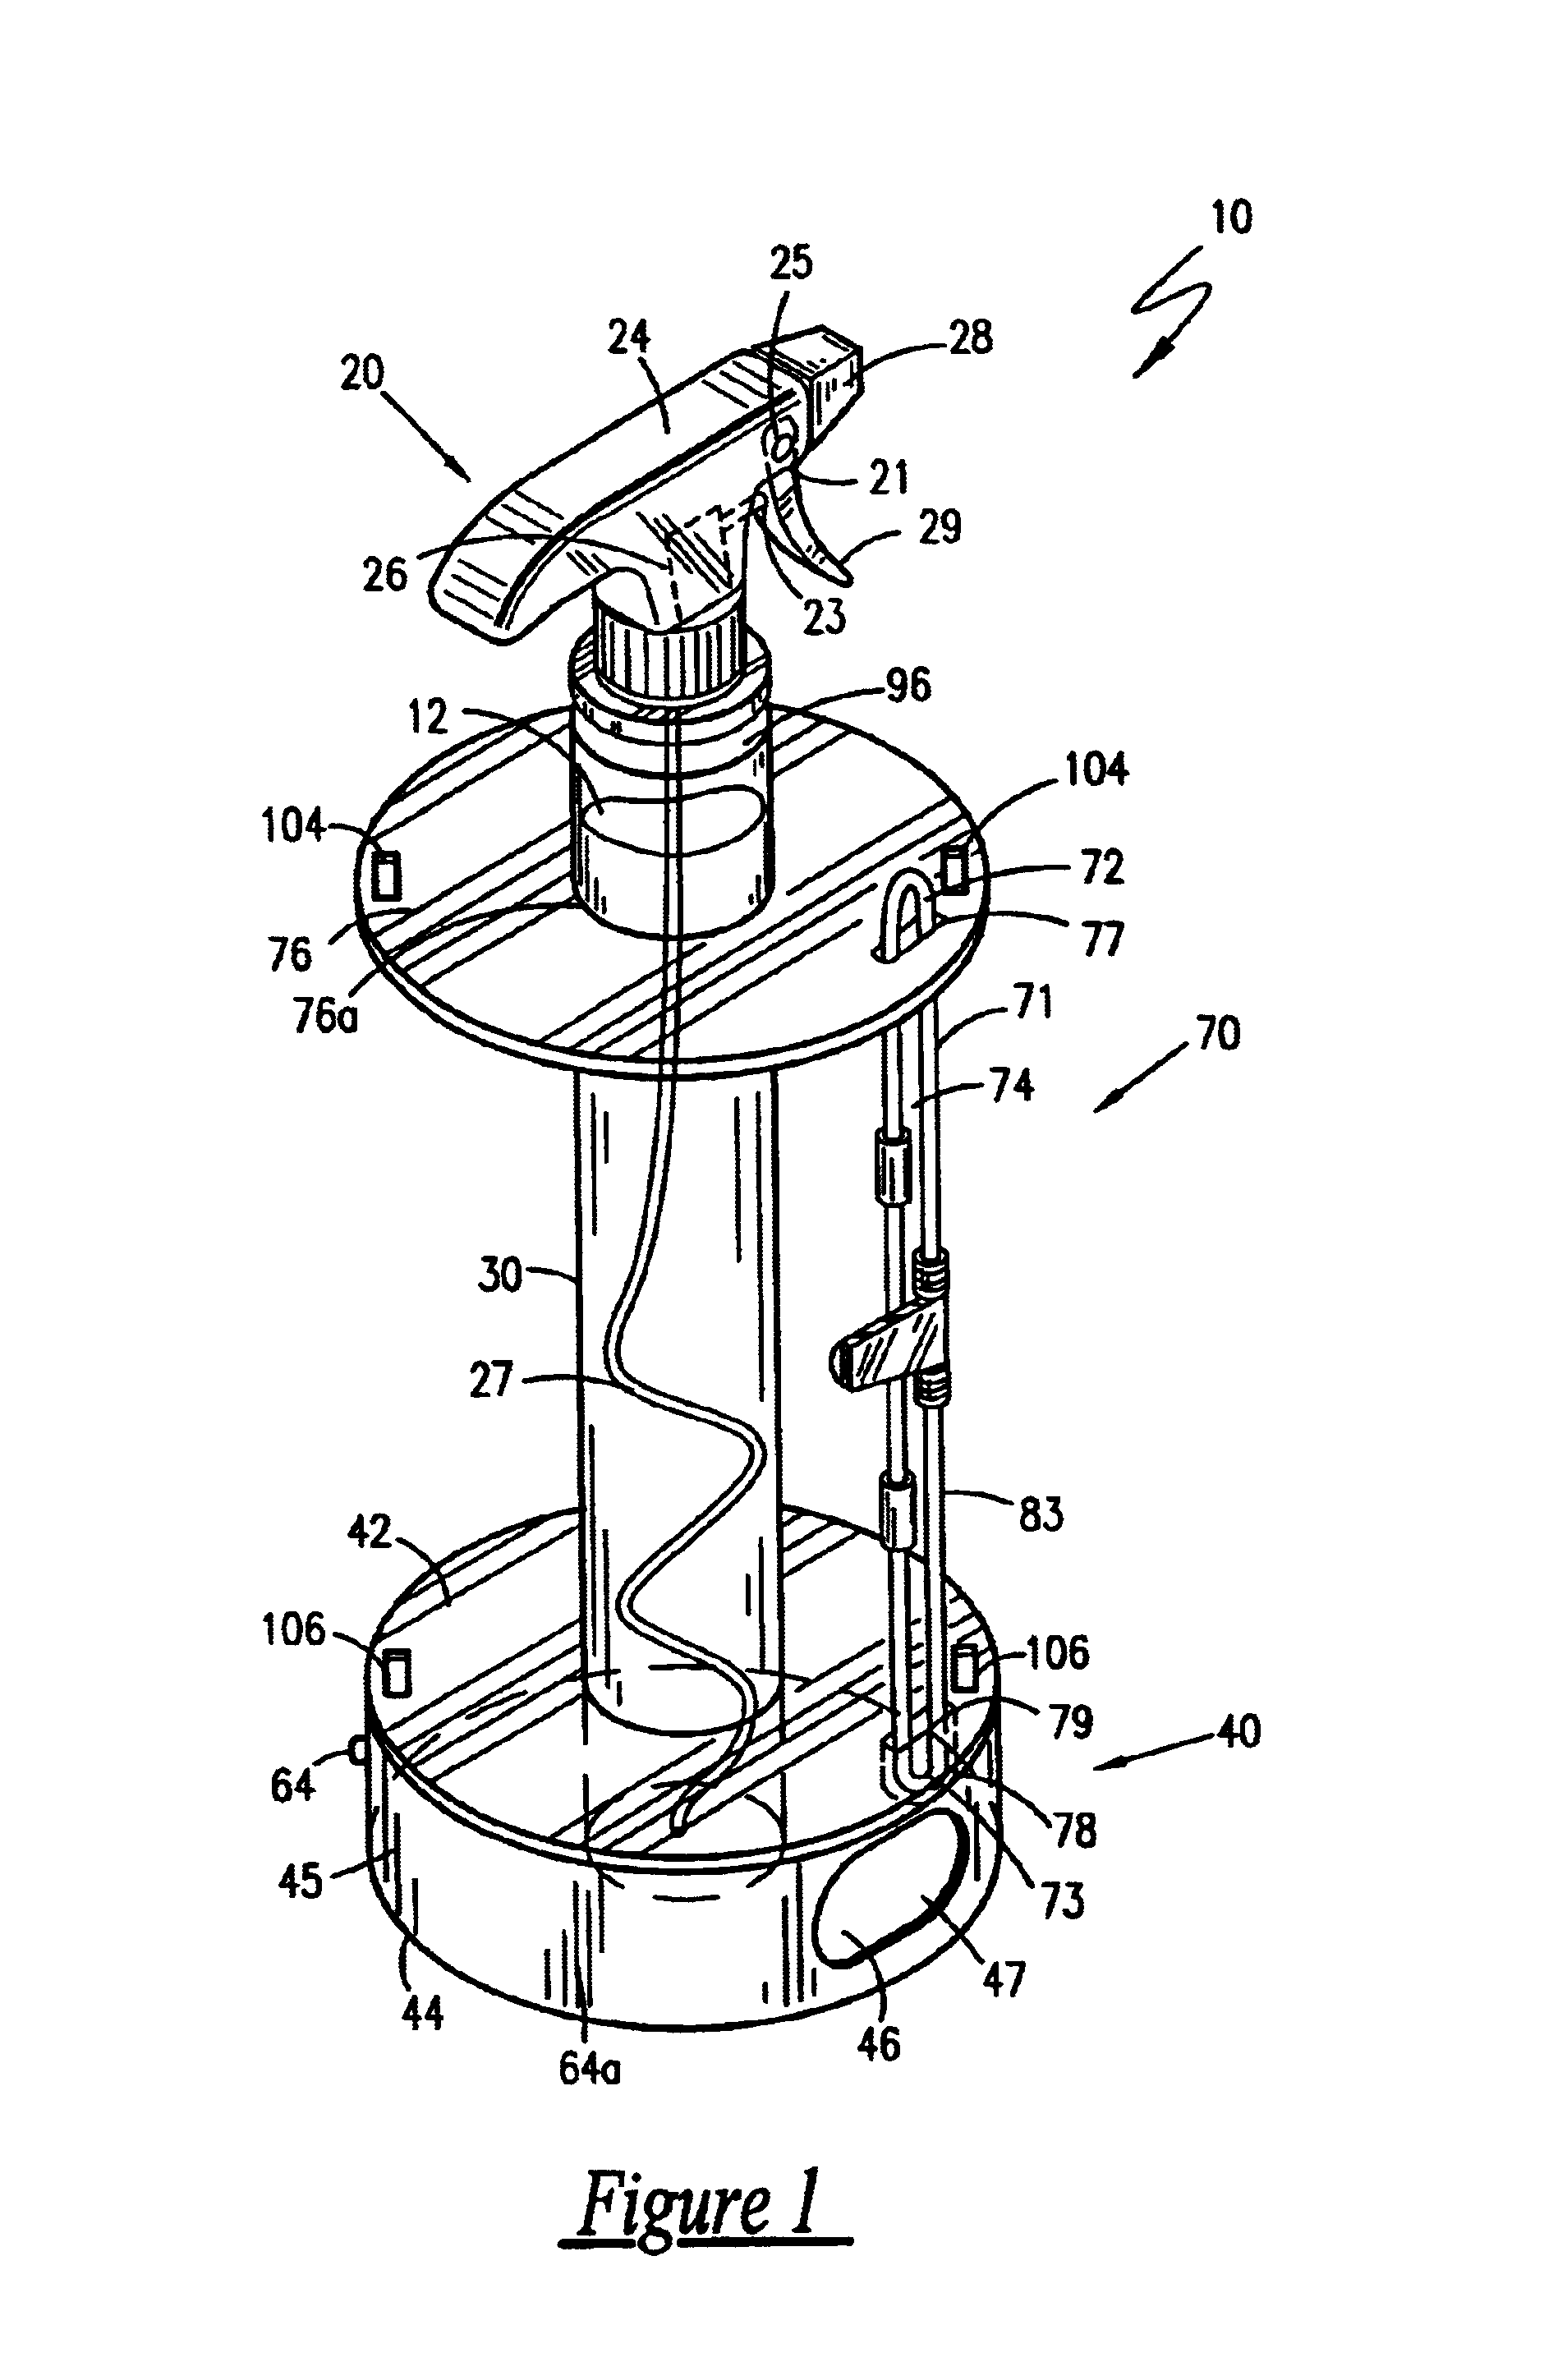 Combined portable, cleaning fluid spray apparatus and paper towel support and dispensing apparatus